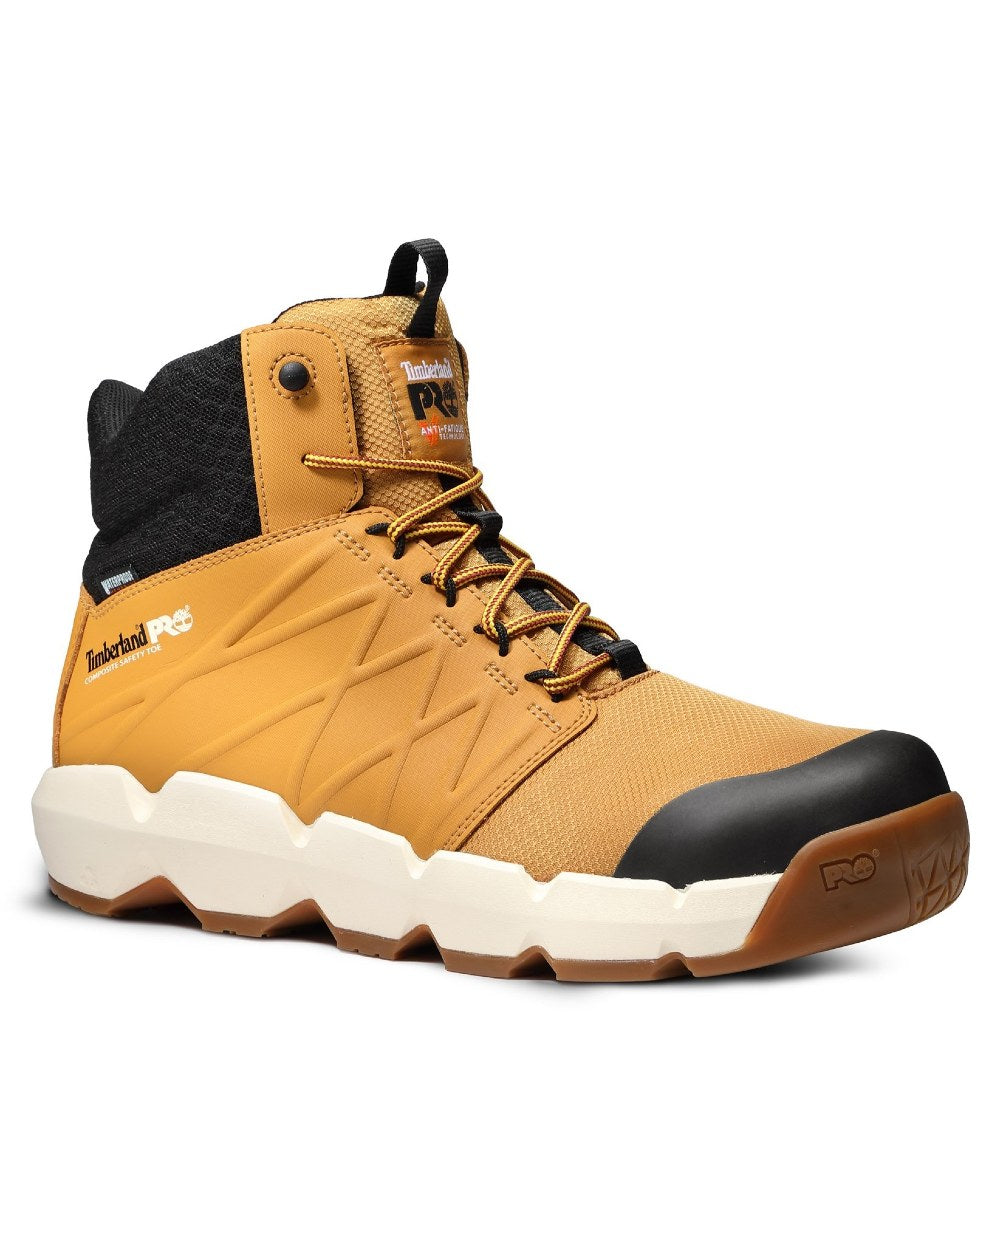 Wheat coloured Timberland Pro Morphix 6&quot; Safety Boots on white background 